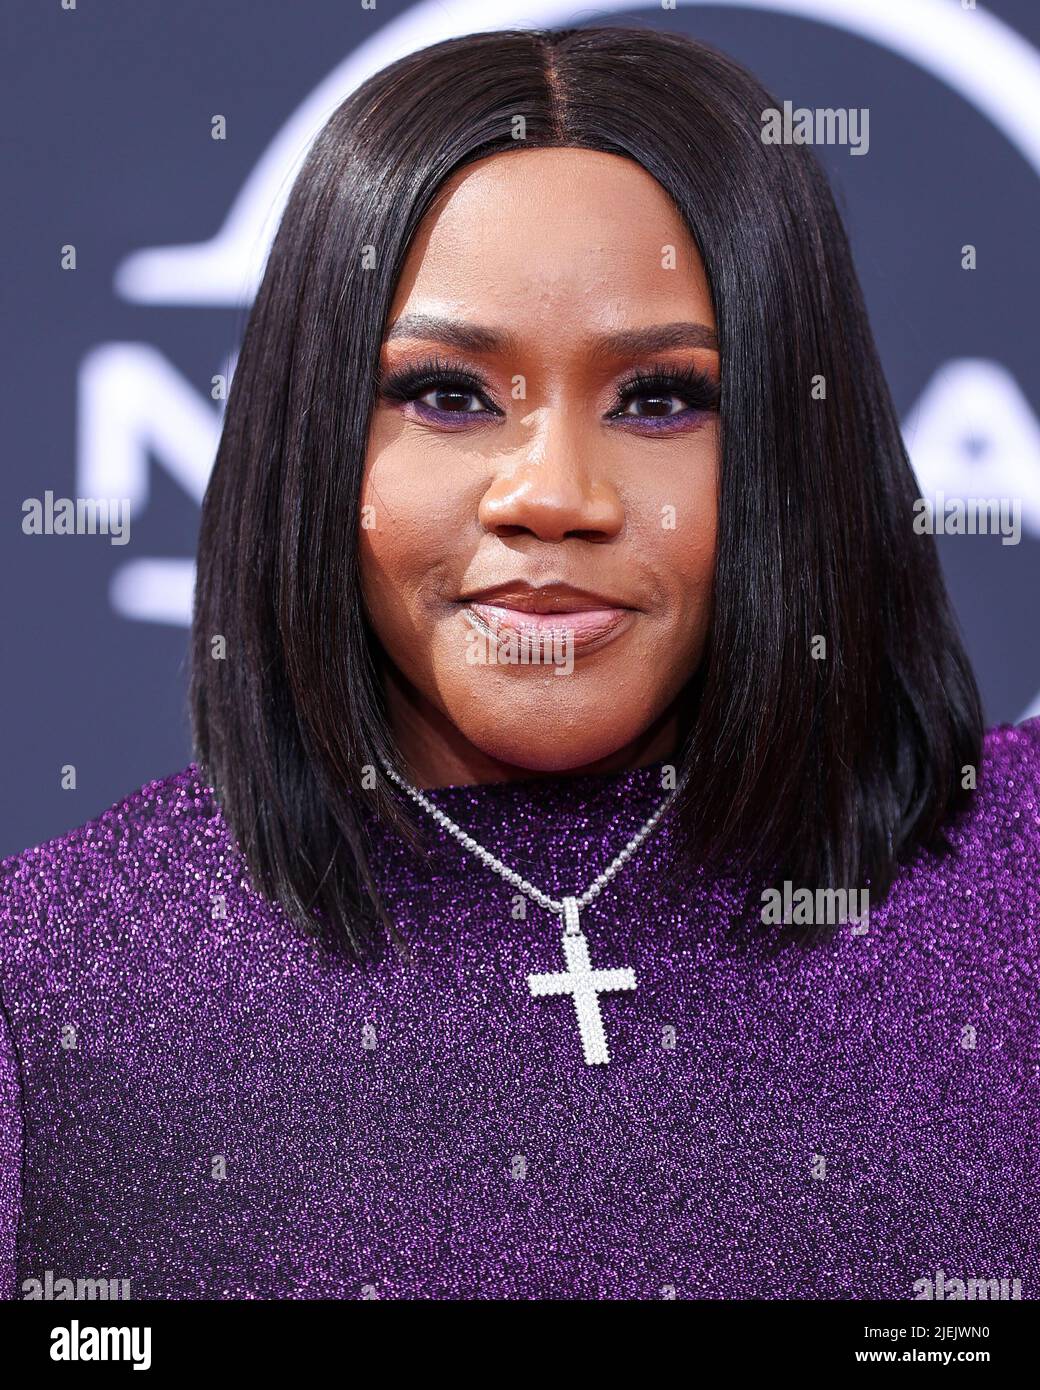 LOS ANGELES, CALIFORNIA, USA - JUNE 26: Kelly Price arrives at the BET Awards 2022 held at Microsoft Theater at L.A. Live on June 26, 2022 in Los Angeles, California, United States. (Photo by Xavier Collin/Image Press Agency) Credit: Image Press Agency/Alamy Live News Stock Photo